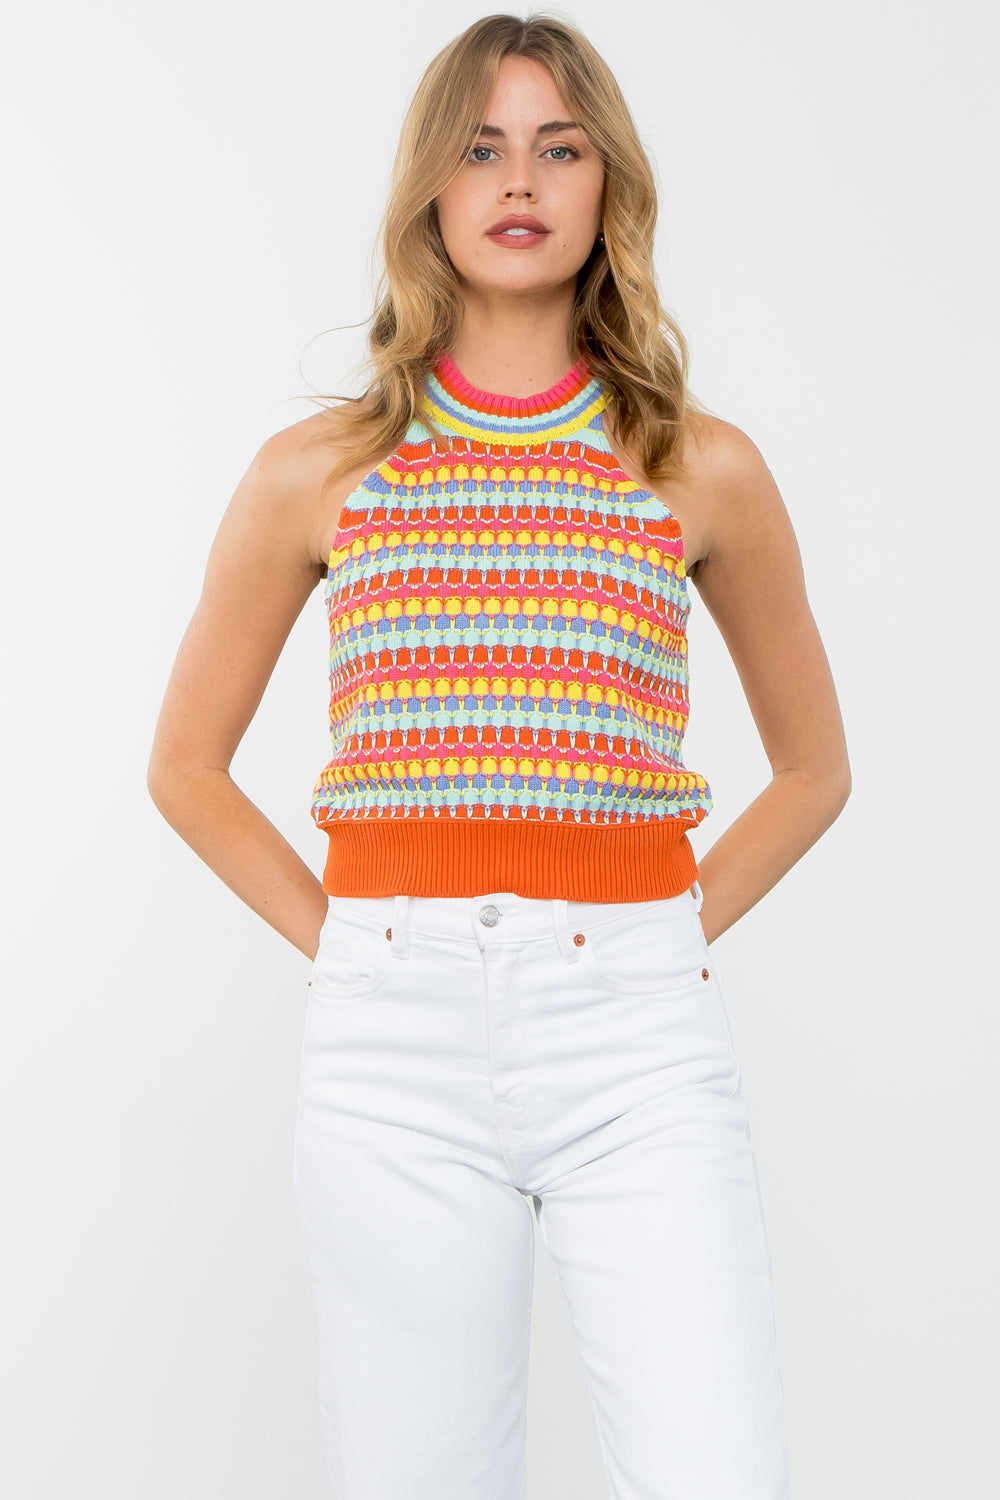 Multi Colored Novelty Top